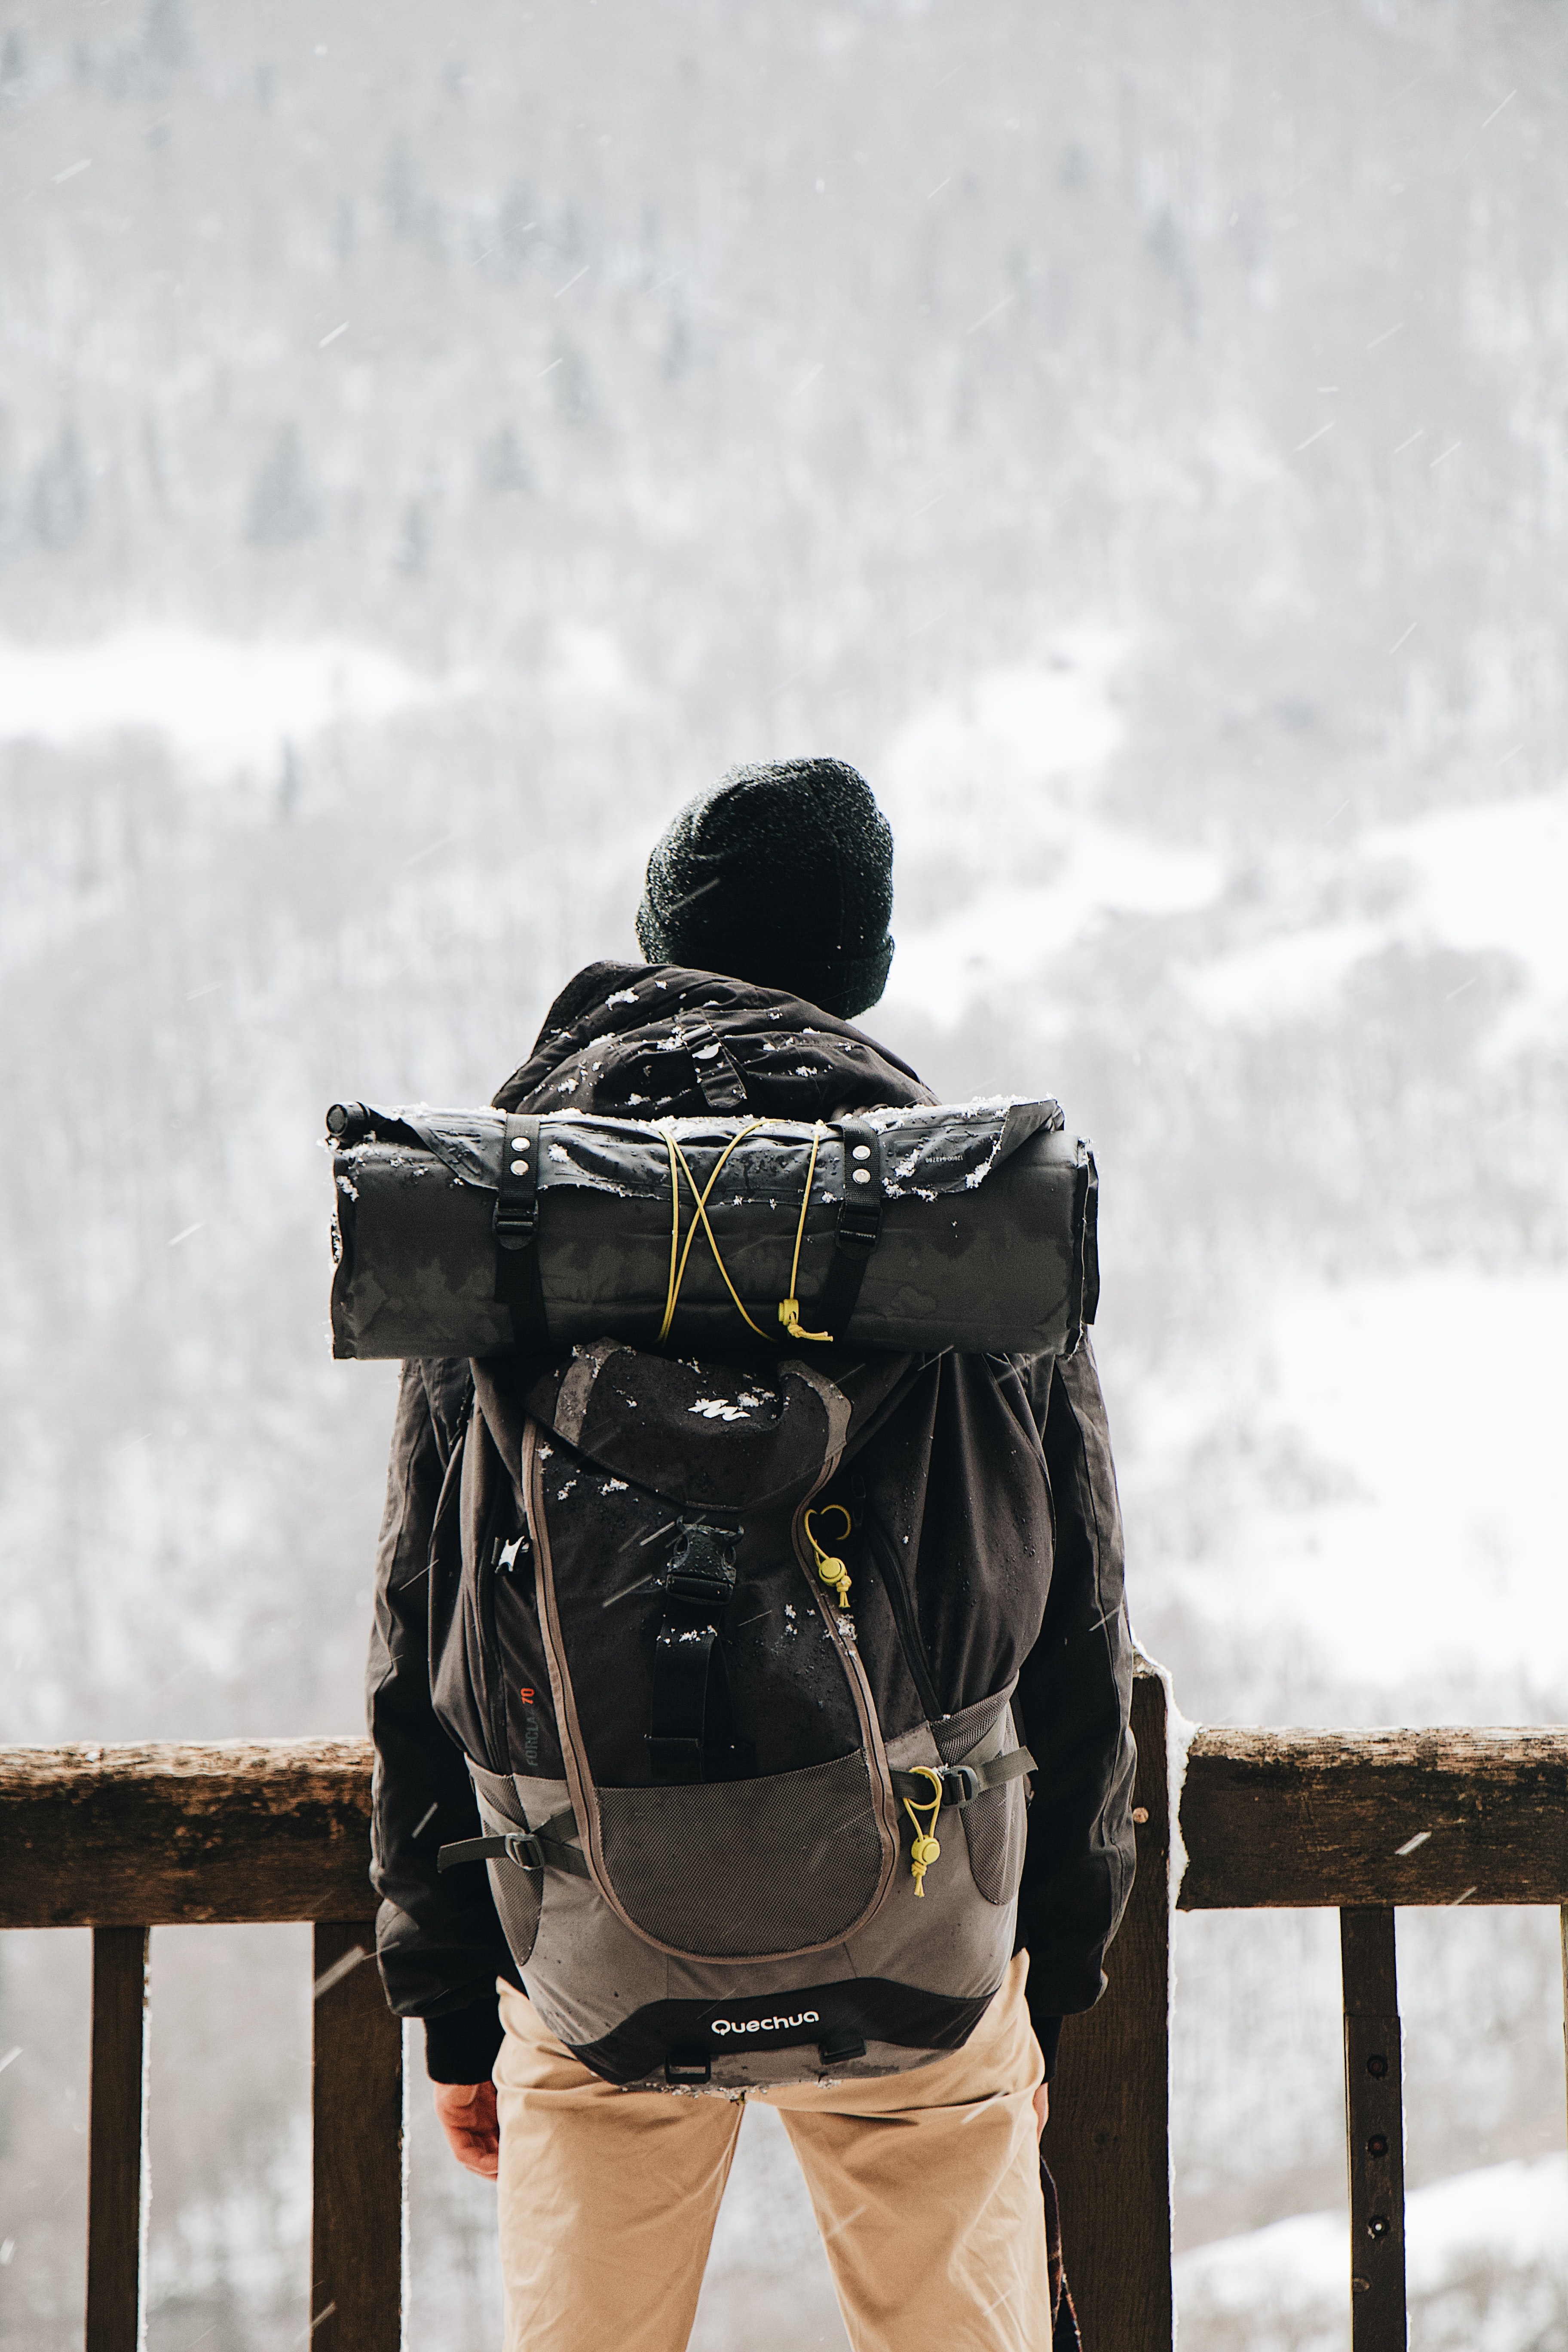 human, miscellanea, snow, miscellaneous, journey, person, backpack, rucksack, tourist High Definition image